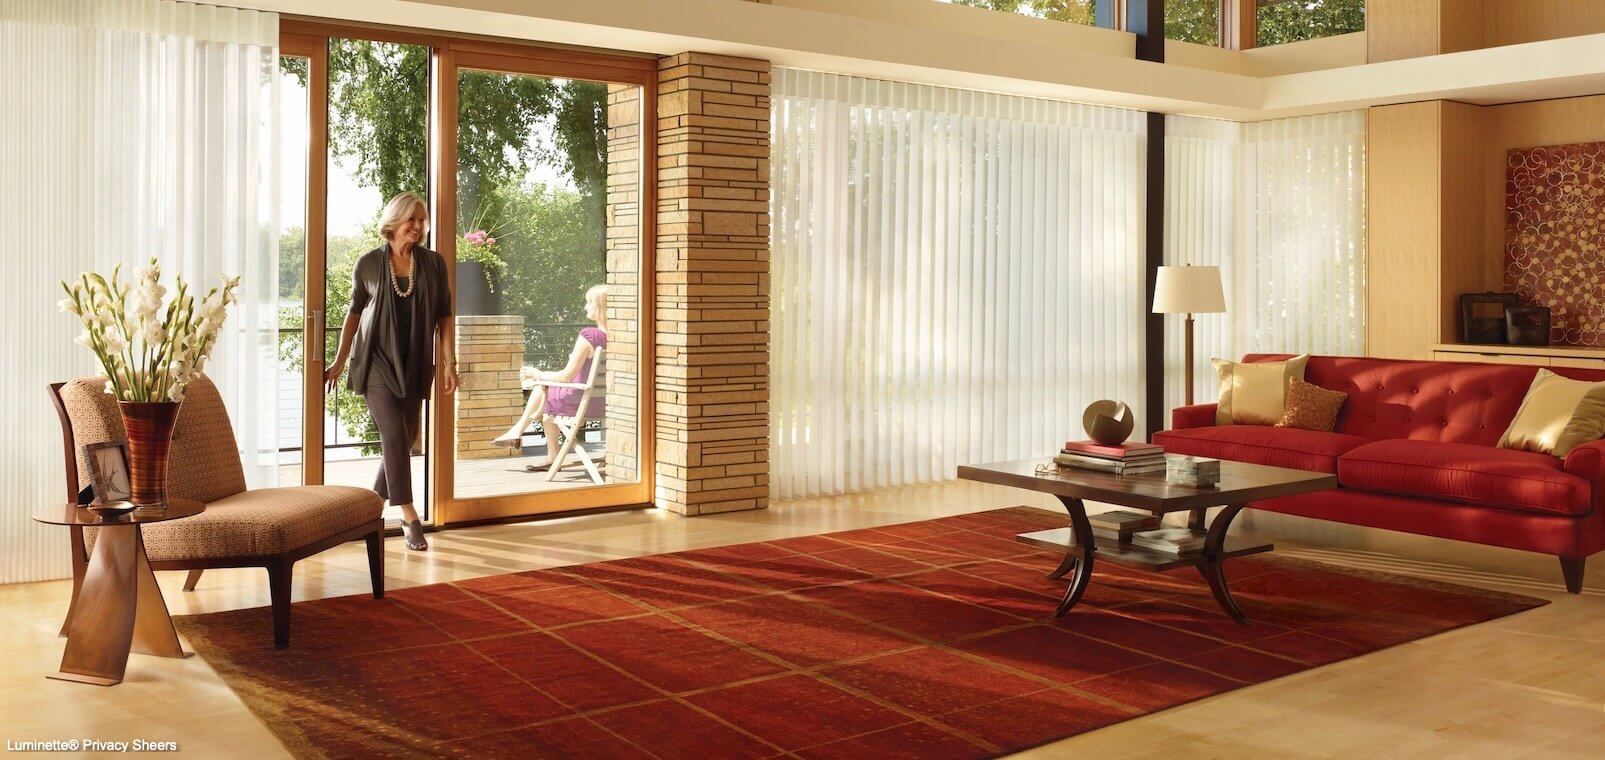 Luminette Privacy Sheers - Stria - Living Room